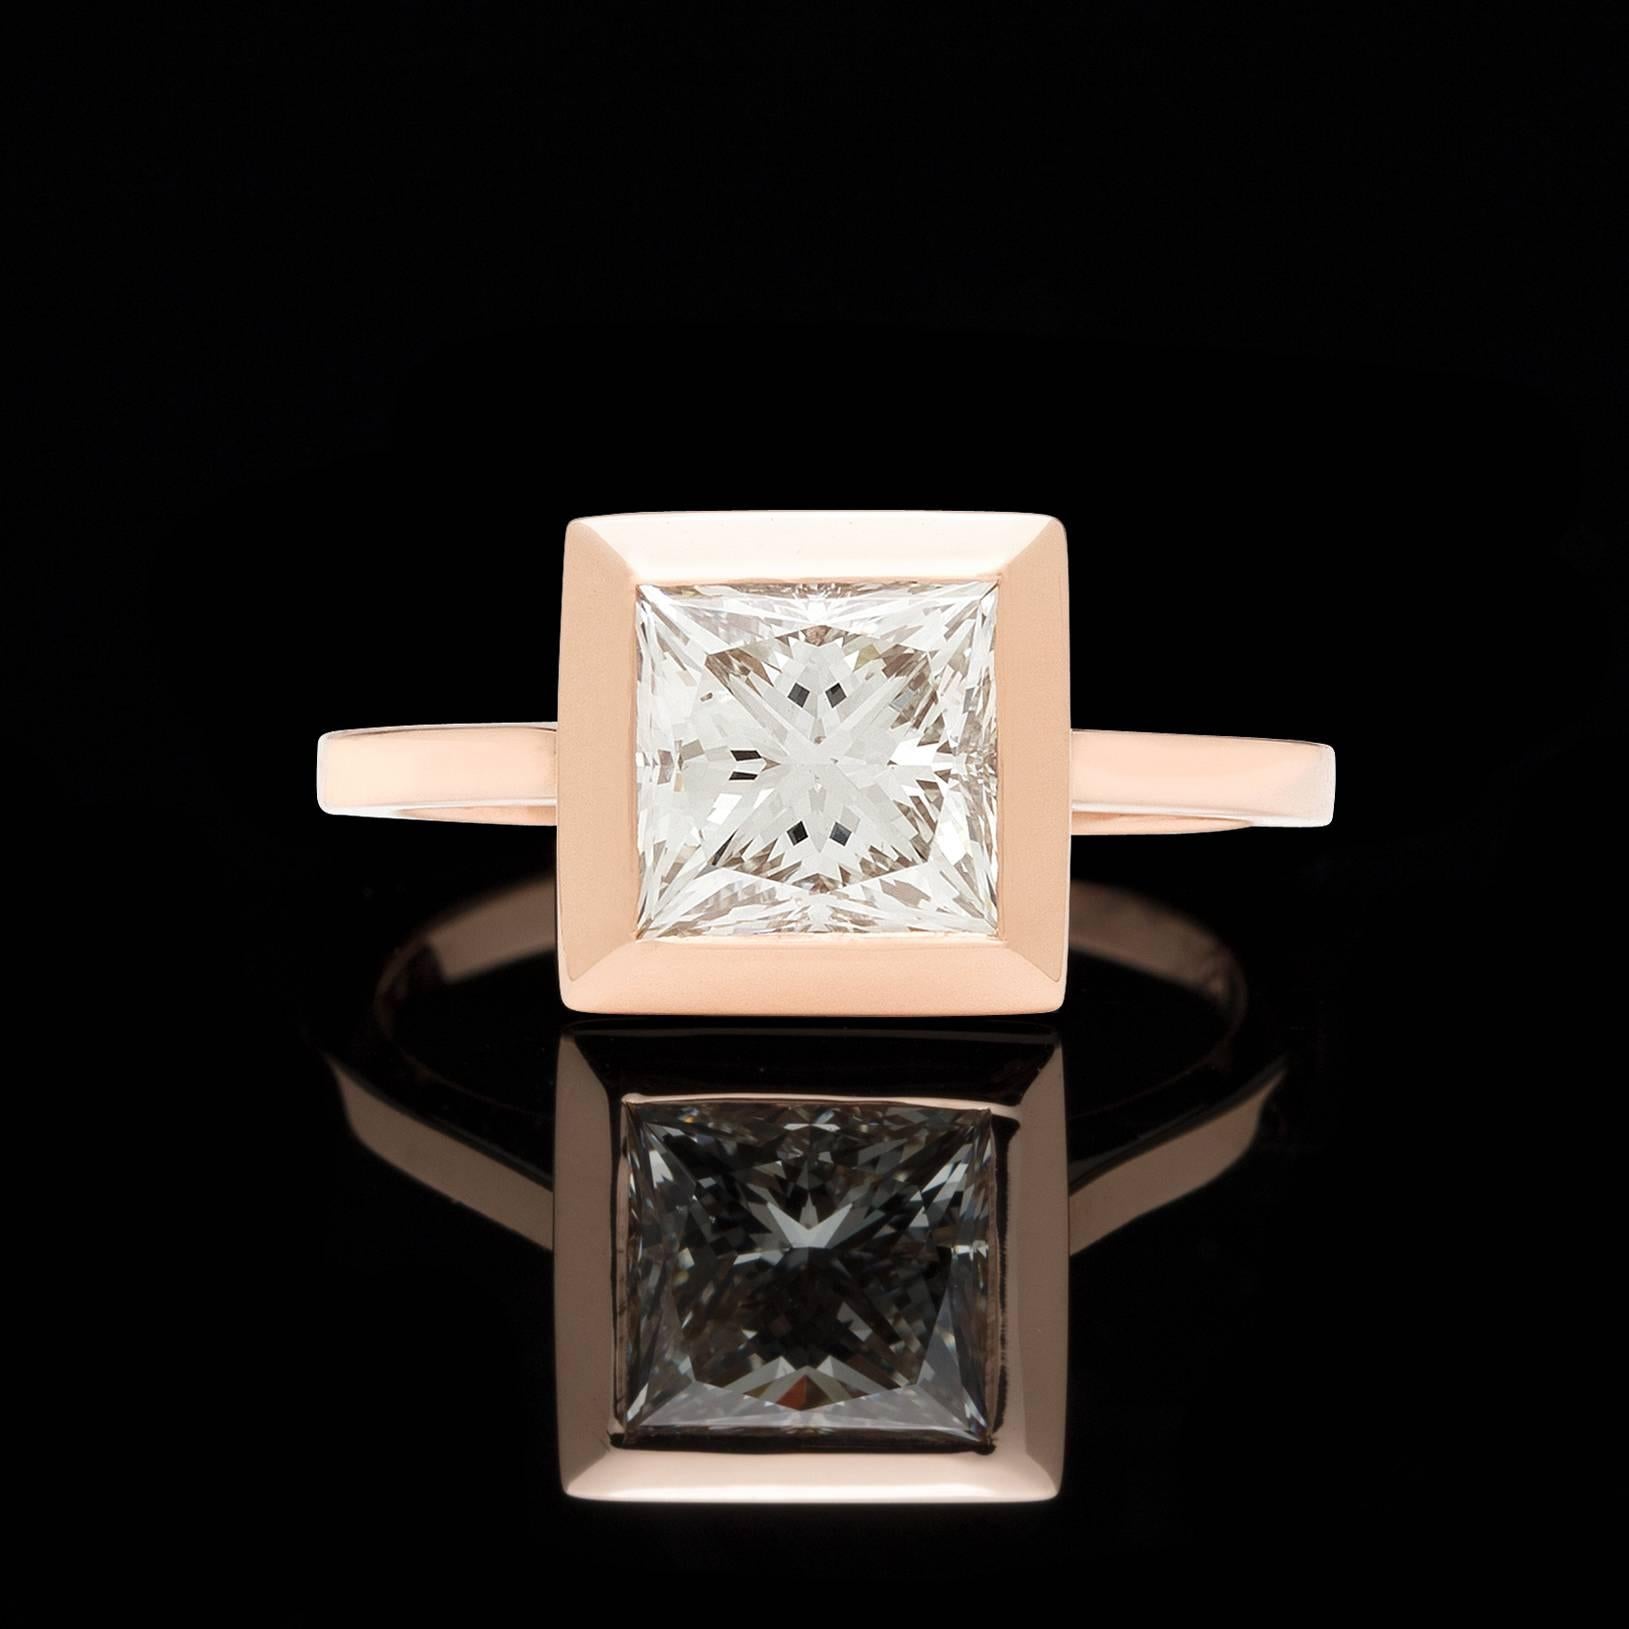 A modern take on the traditional Solitaire Princess Cut Ring. Beautiful Rose Gold helps breathe extraordinary life into this fantastic 2.02 carat GIA graded center stone. Designed specifically for 66mint by our master bench jeweler, this piece was